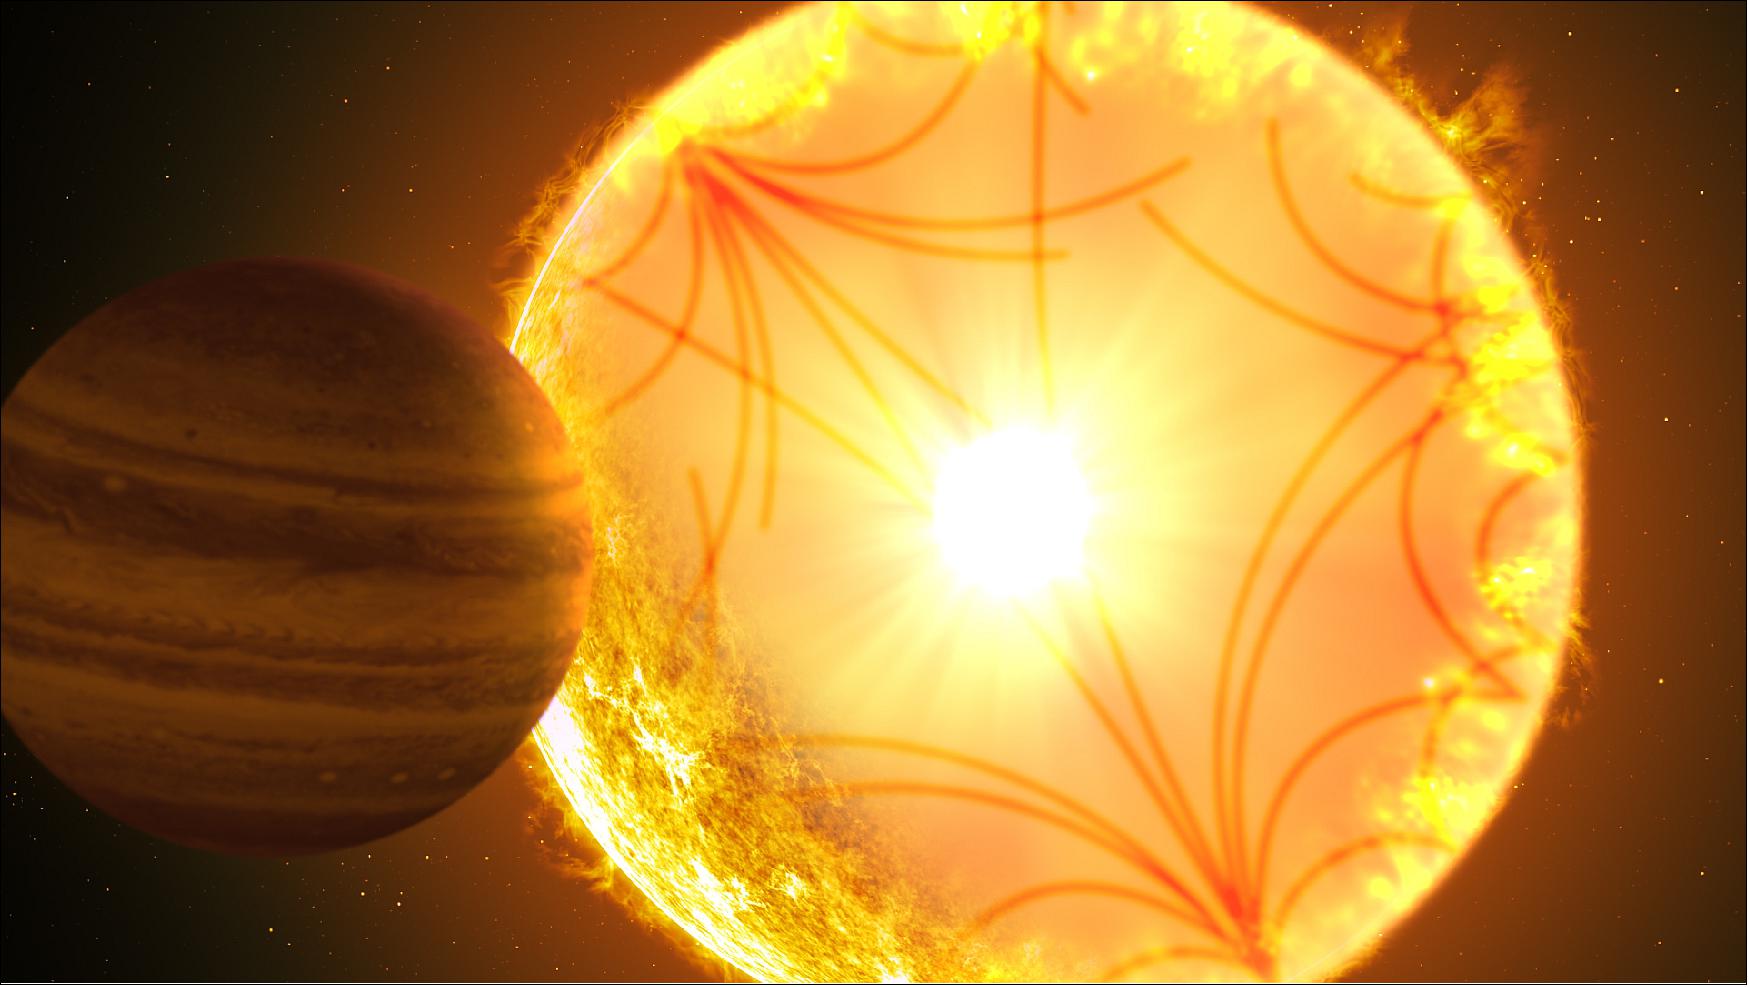 Figure 26: Artist's concept of a Kepler-1658-like system. Sound waves propagating through the stellar interior were used to characterize the star and the planet. Kepler-1658b, orbiting with a period of just 3.8 days, was the first exoplanet candidate discovered by Kepler nearly 10 years ago (image credit: Gabriel Perez Diaz/Instituto de Astrofísica de Canarias)